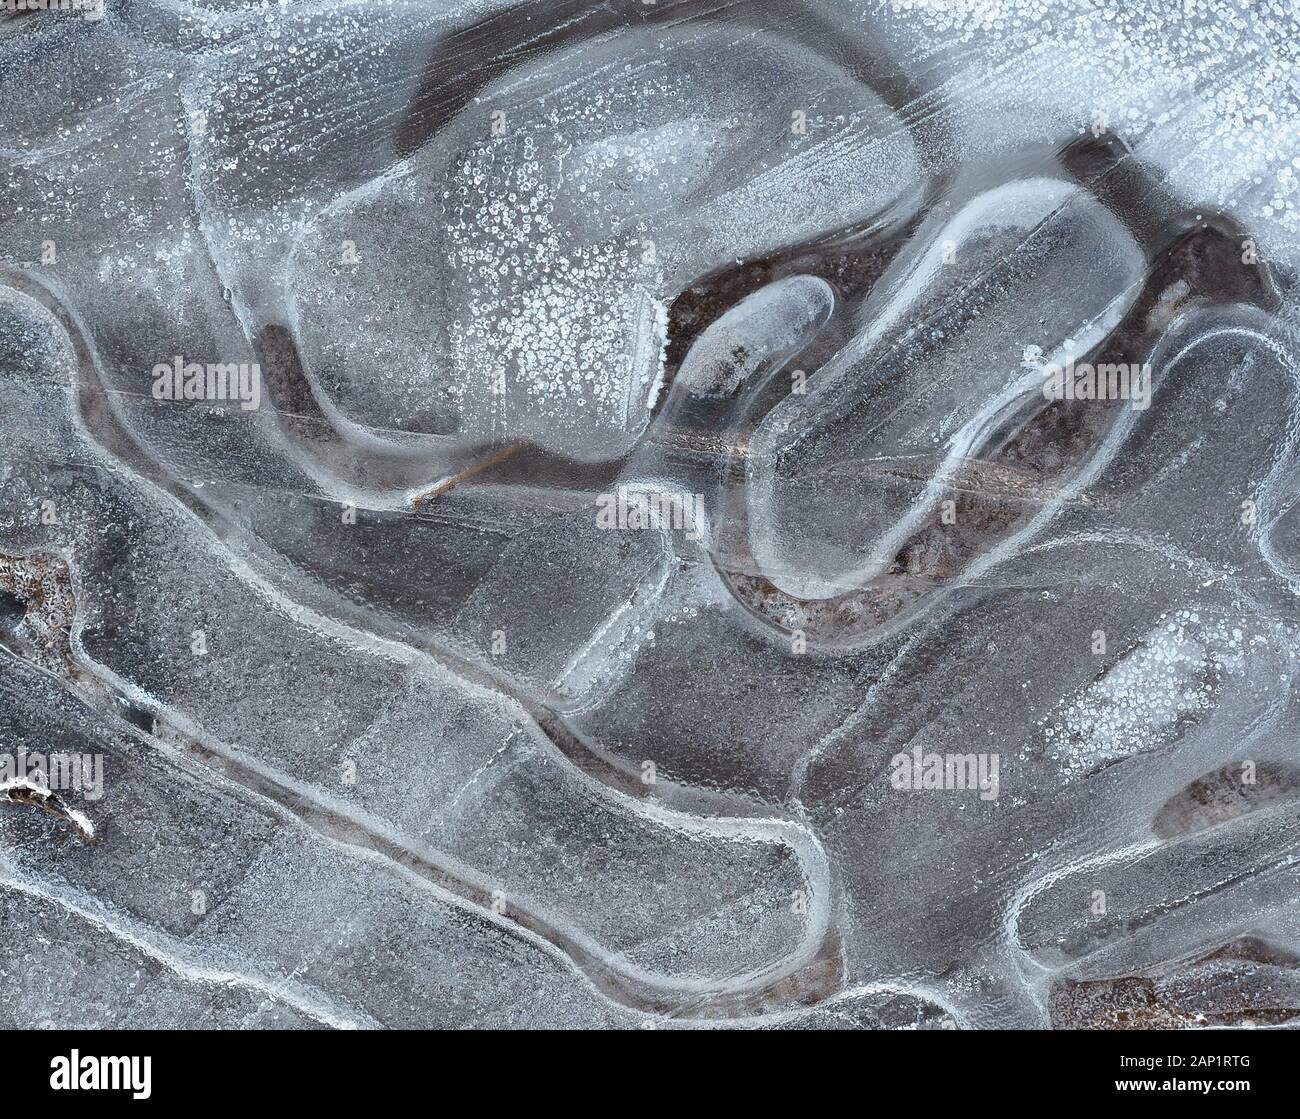 Abstract image of crack pattern in frozen puddle. Stock Photo